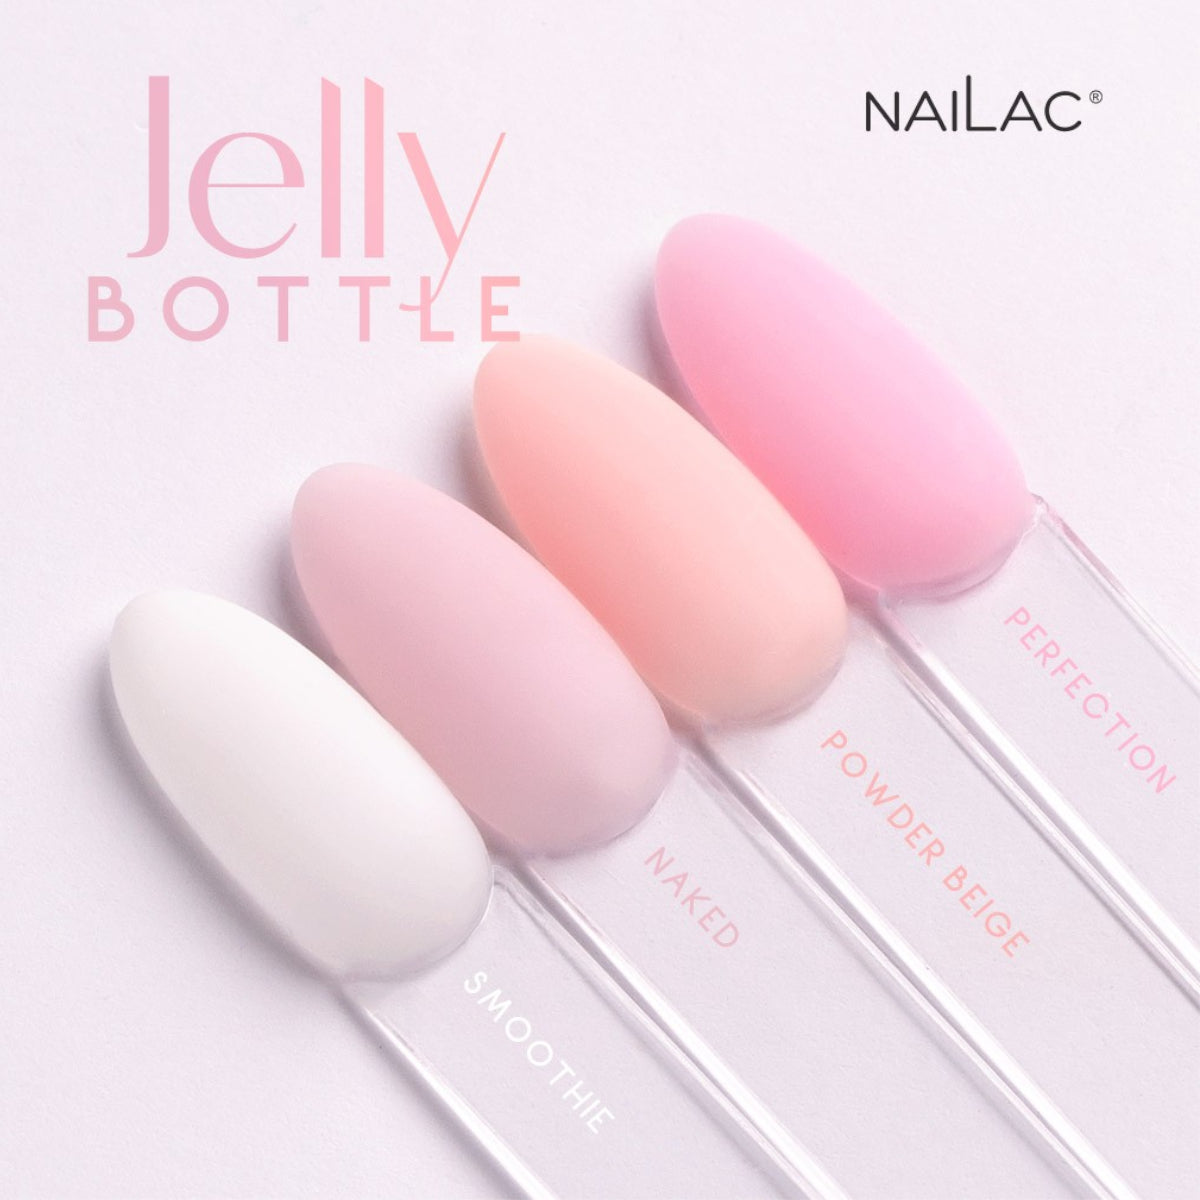 Nailac Jelly Bottle Gel Naked Pink Collection